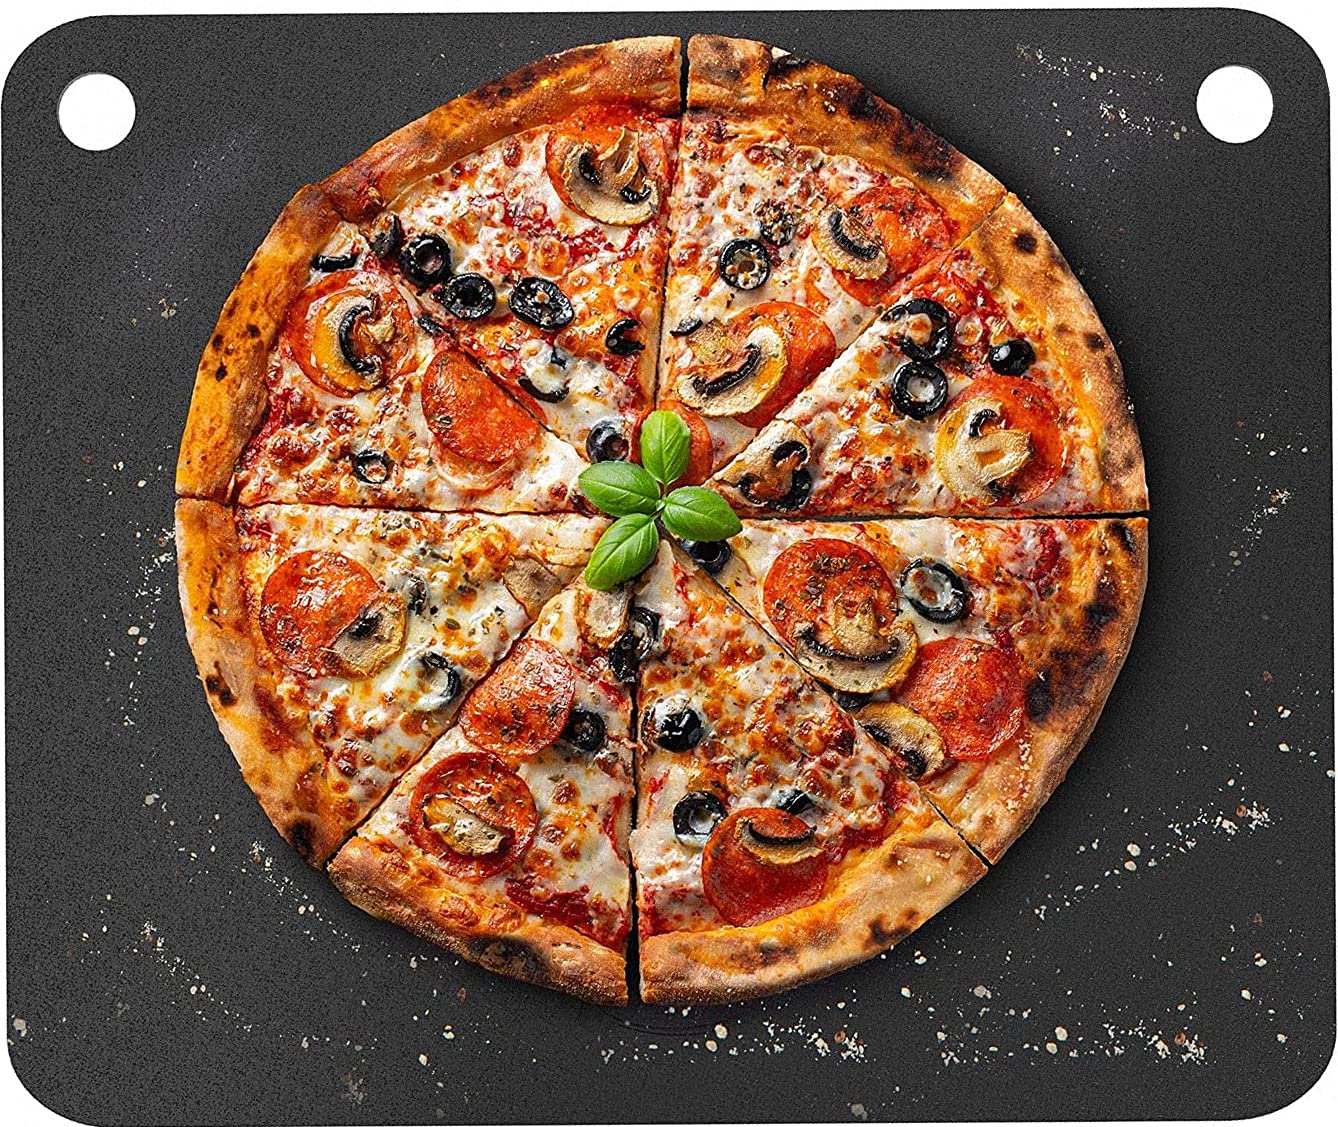 Primica Pizza Steel for Oven - 16” x 13.4” x ¼” Durable Steel as Alternative to Pizza Stone - High Quality Steel for BBQ Grill and Bakings